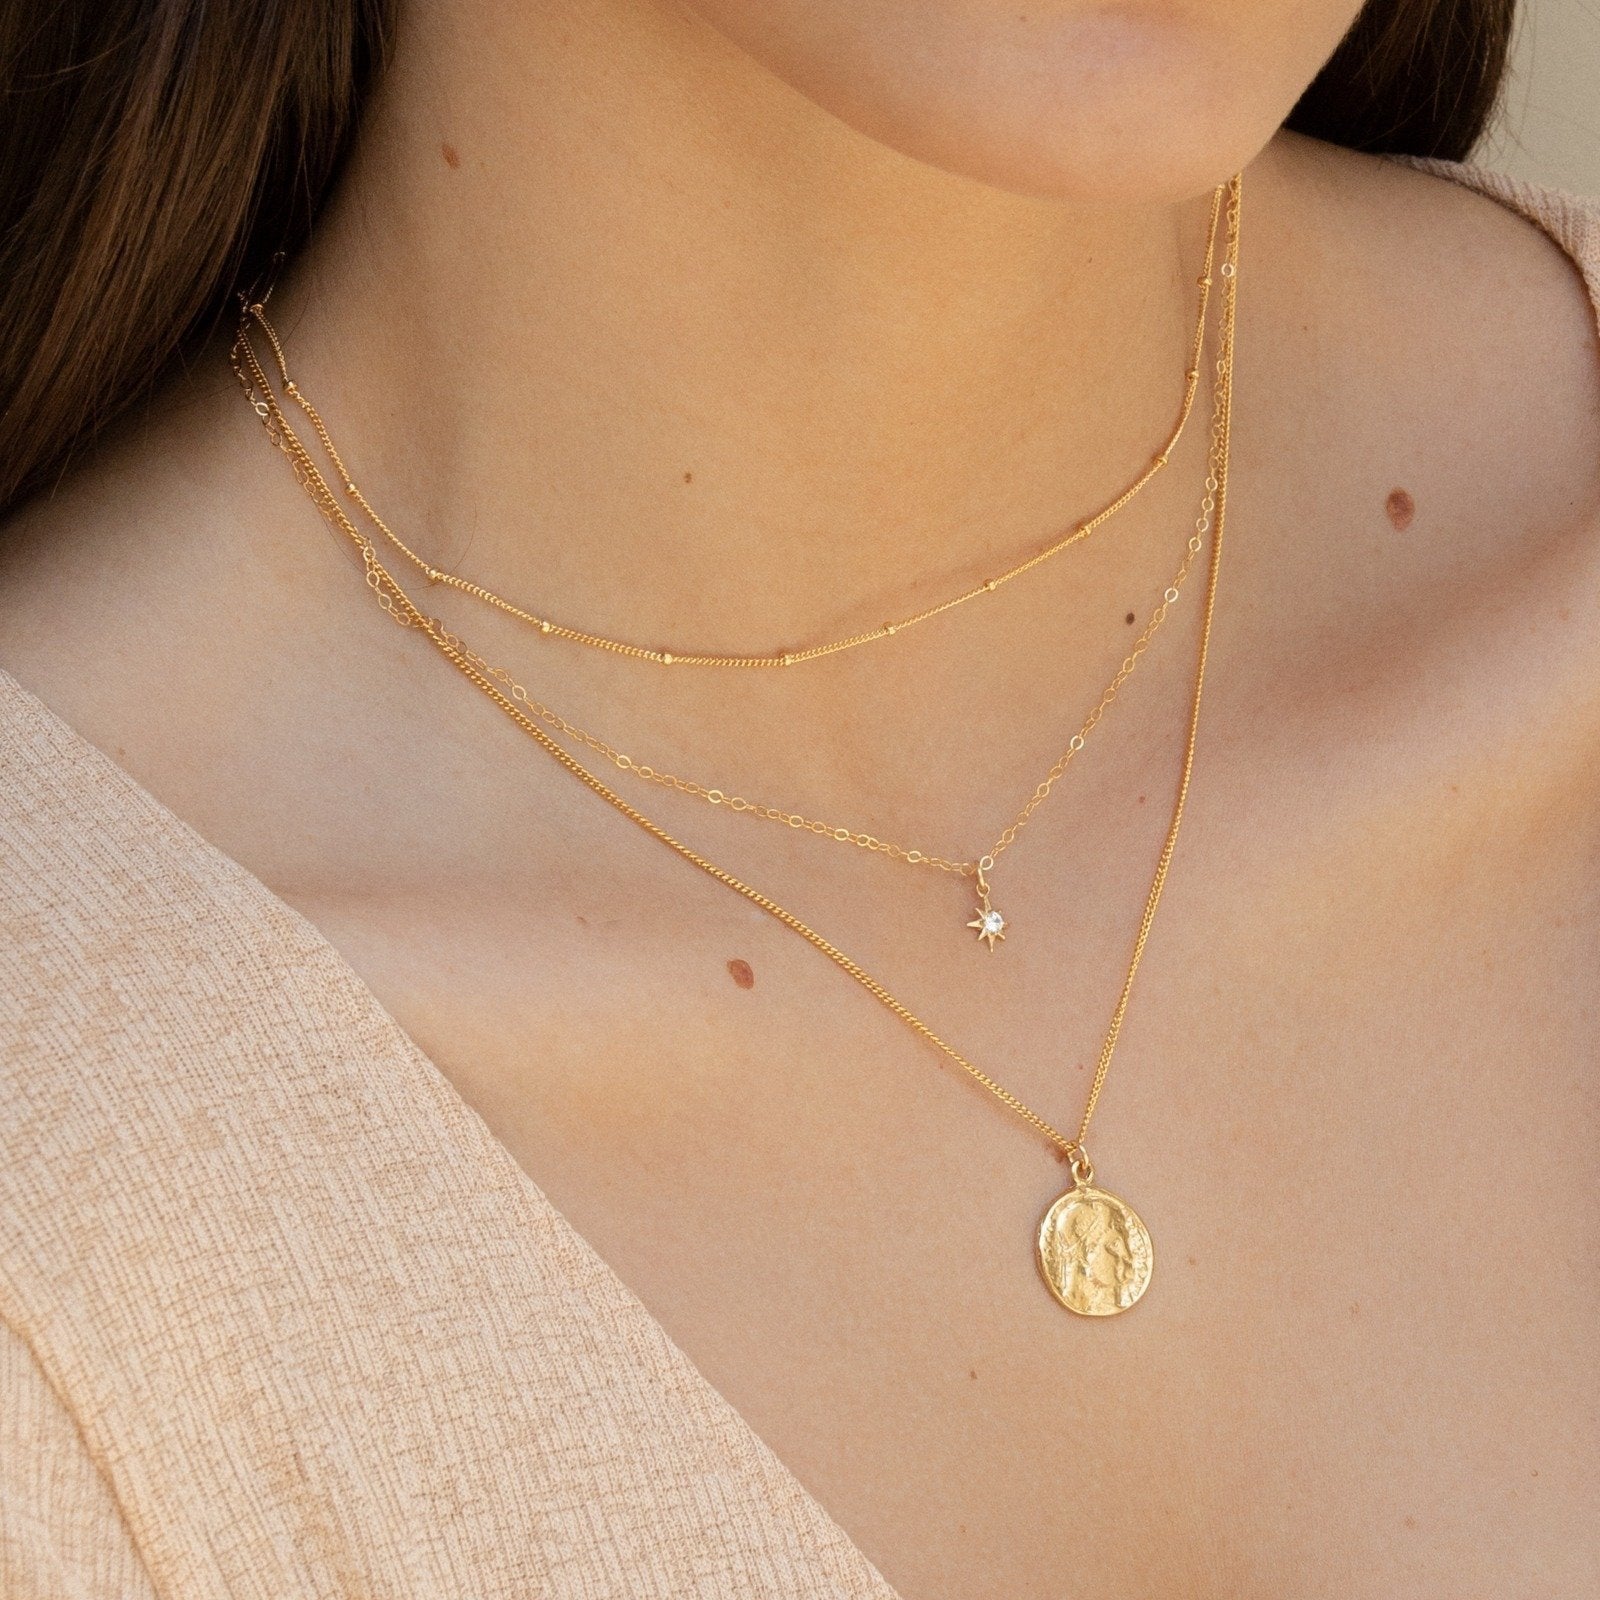 Layering Necklaces 101: Layering Lengths & Chain Mix Secrets 